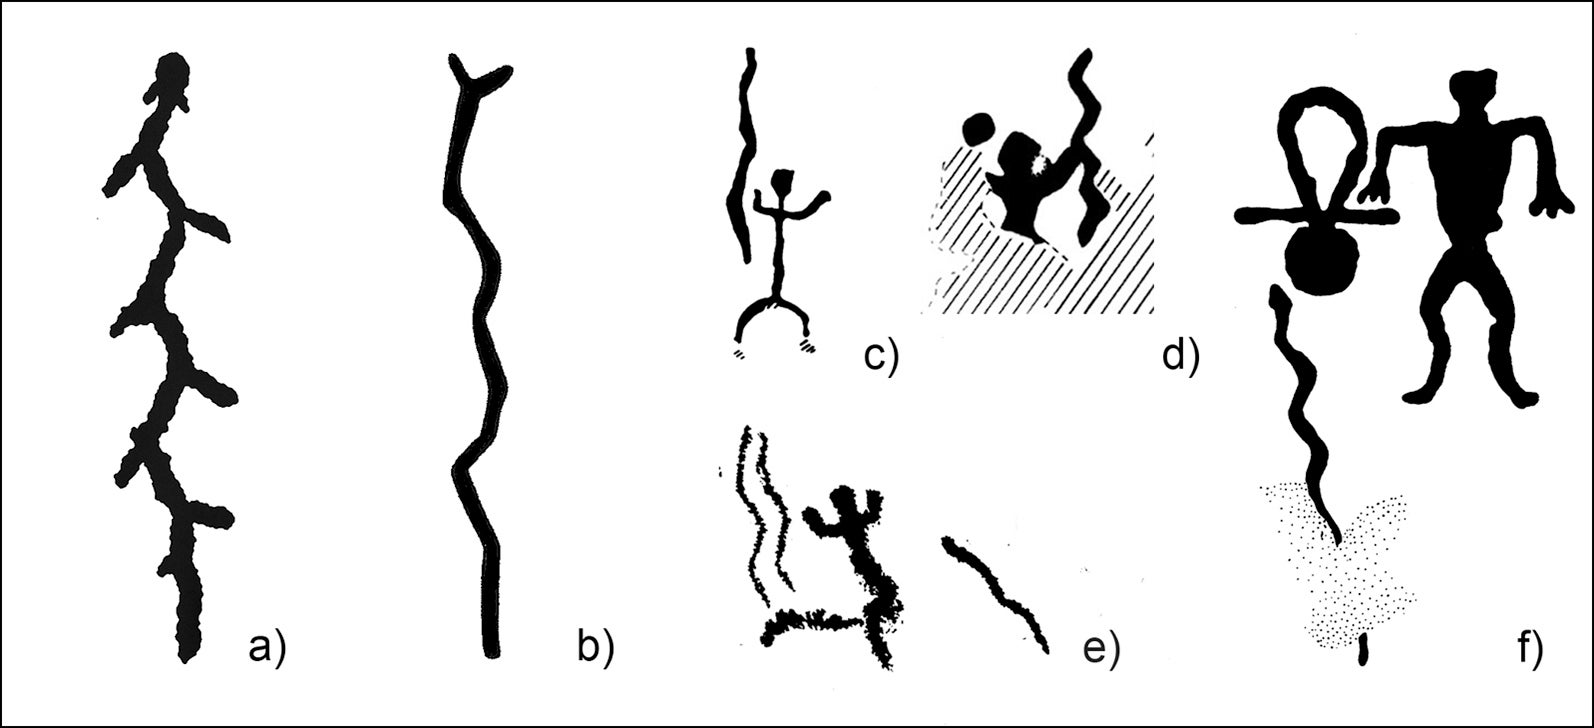 Rock art from the same time and region depict human figures carrying snake-like objects.  (Image: S. Koivisto et al., 2021/Antiquity)